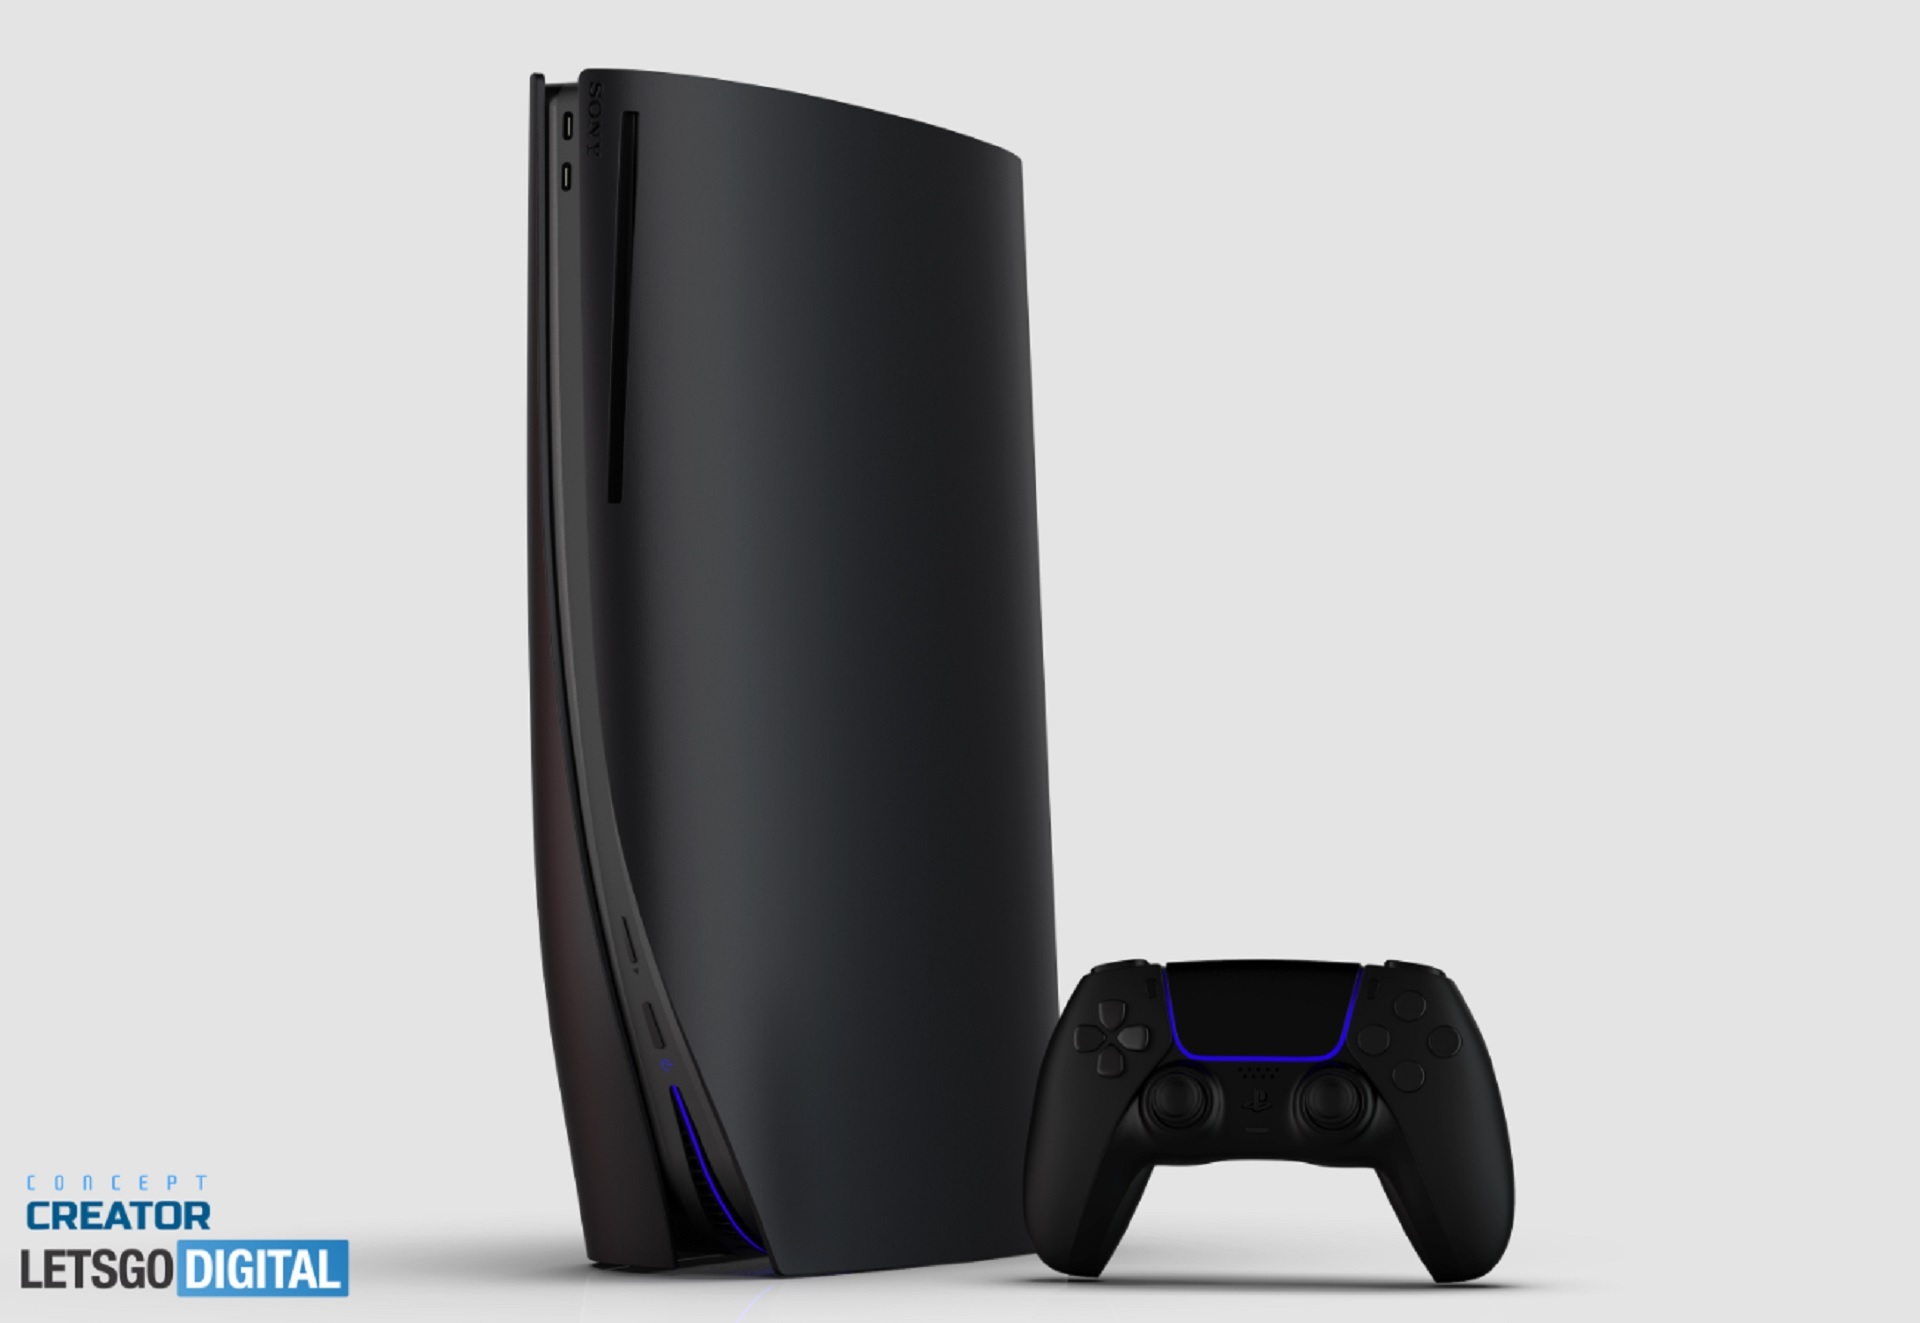 When will Sony PlayStation 5 Pro be available, Concept Creator, LetsGoDigital 2